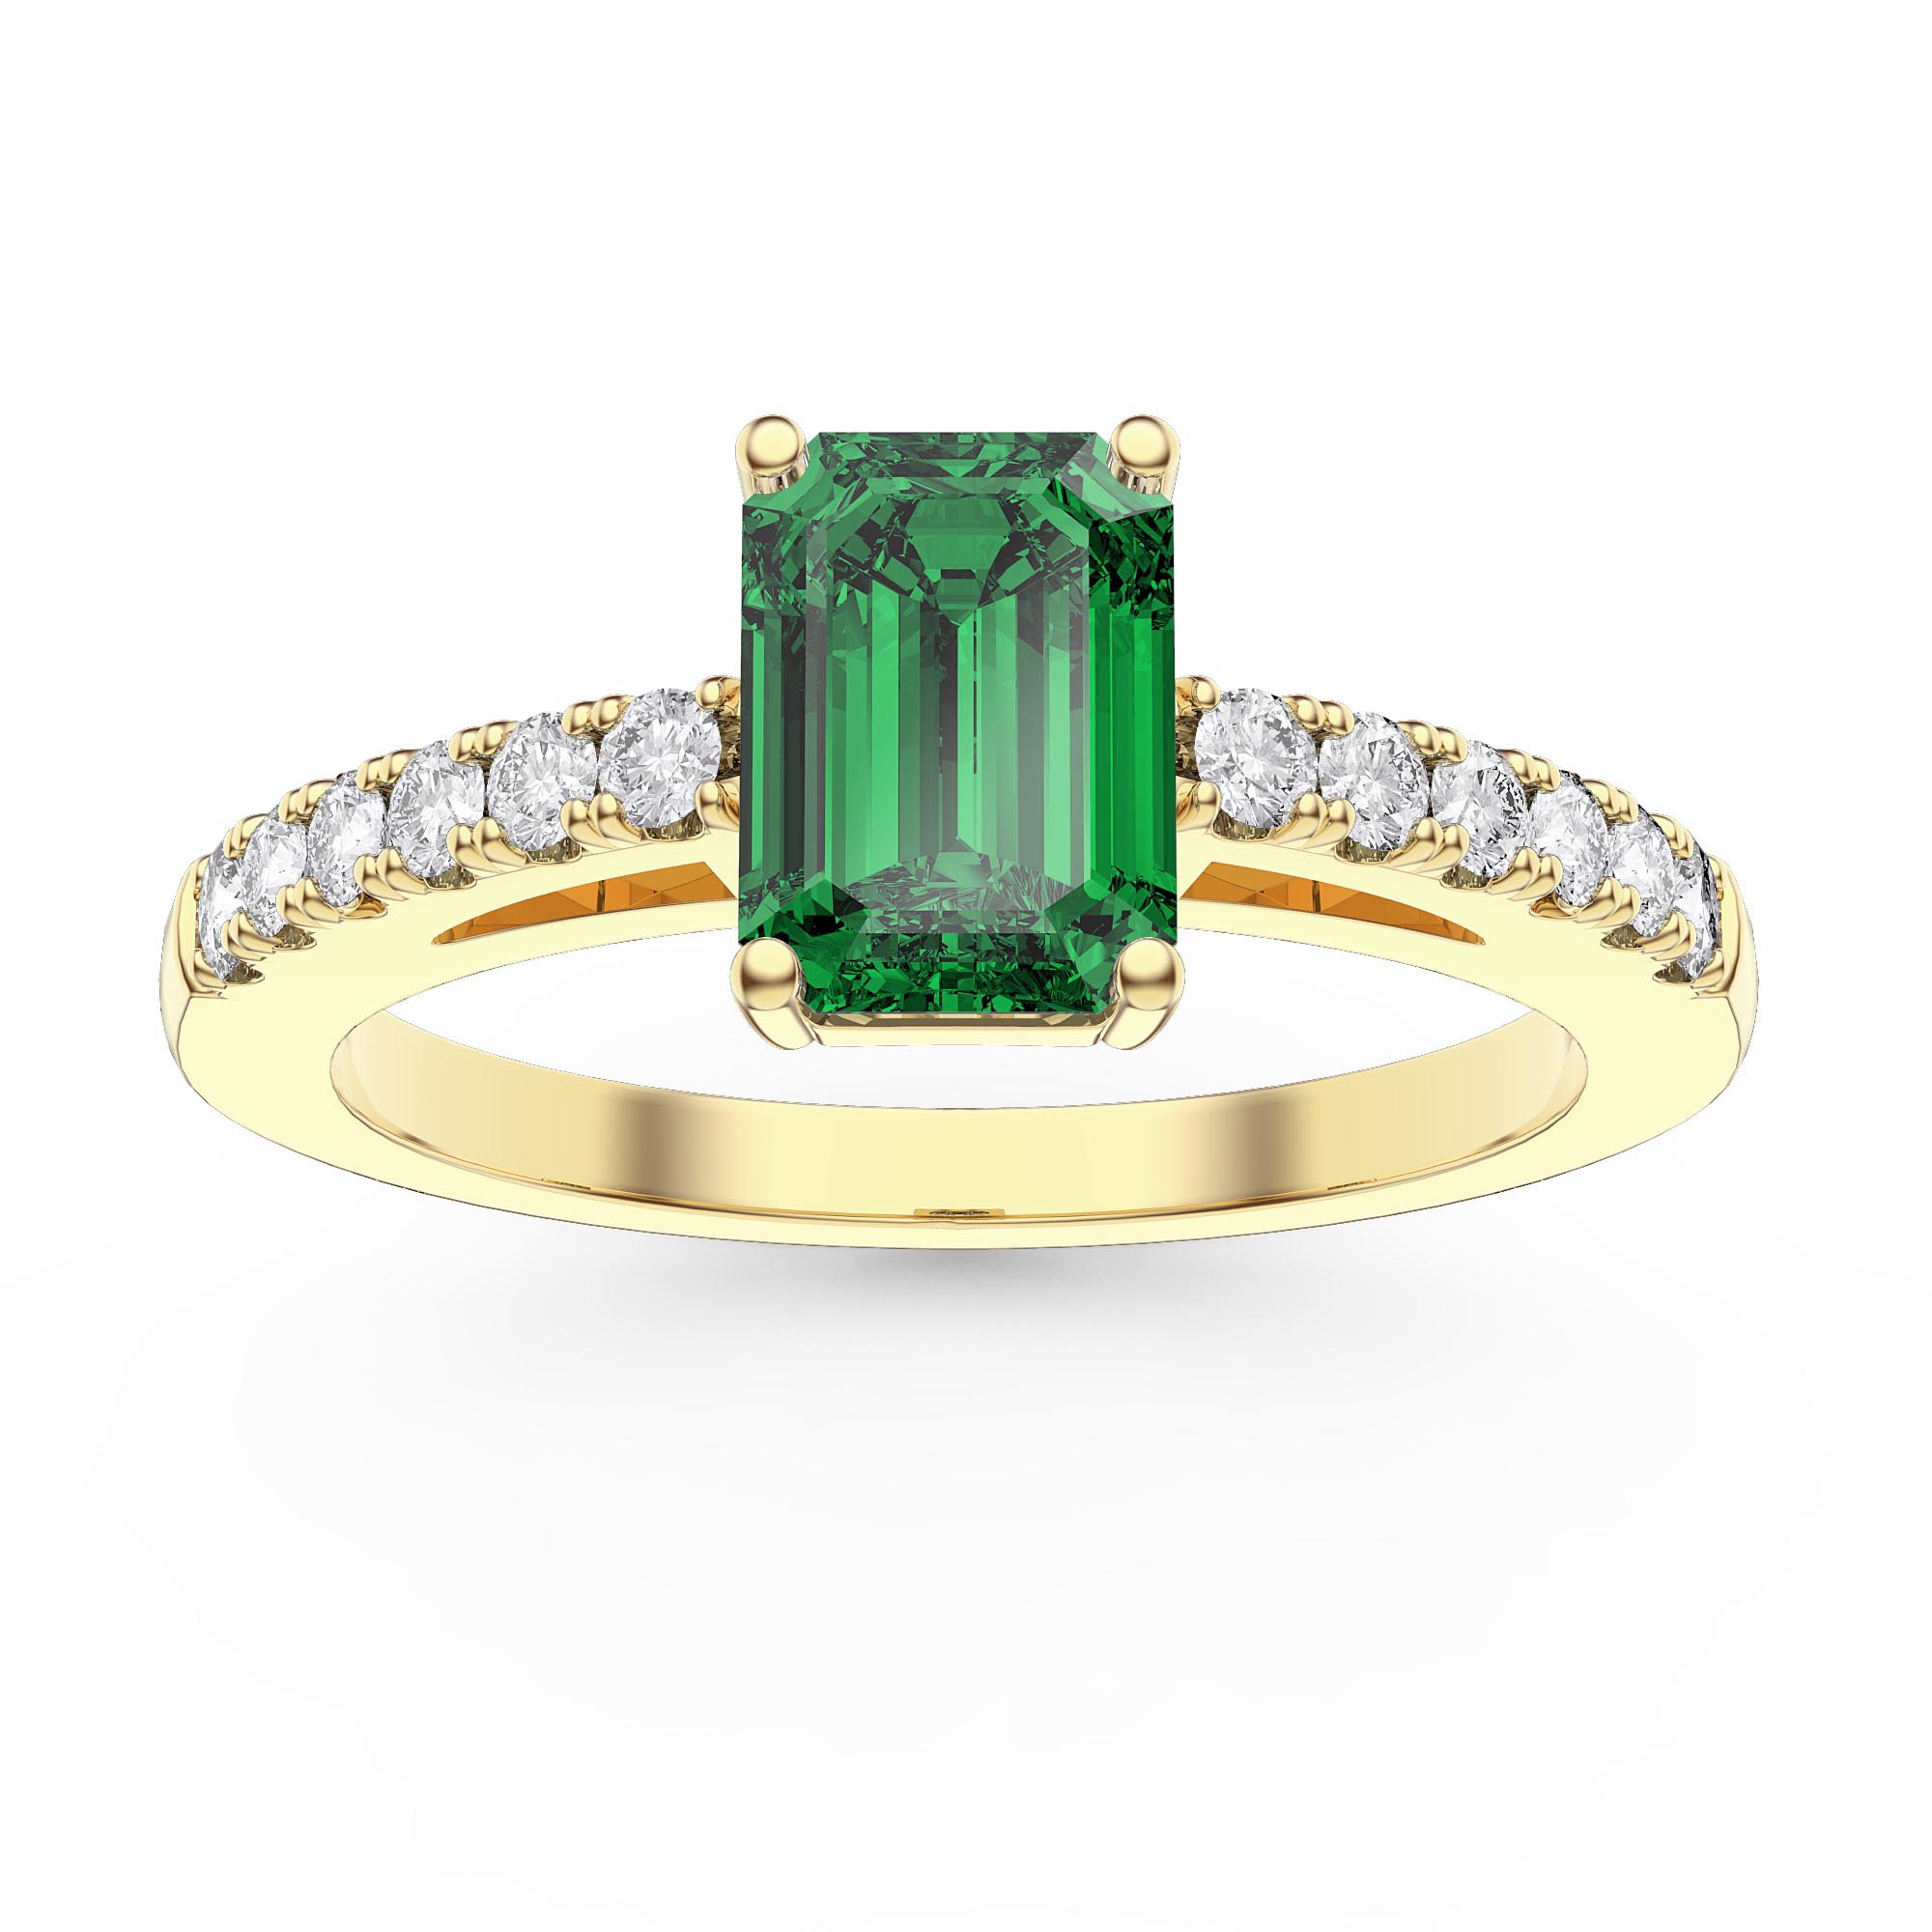 solitaire 14k yellow gold 2g ring . 5*4*2.7 mm Swat oval emerald 0.4 crt Emerald 14k yellow gold ring